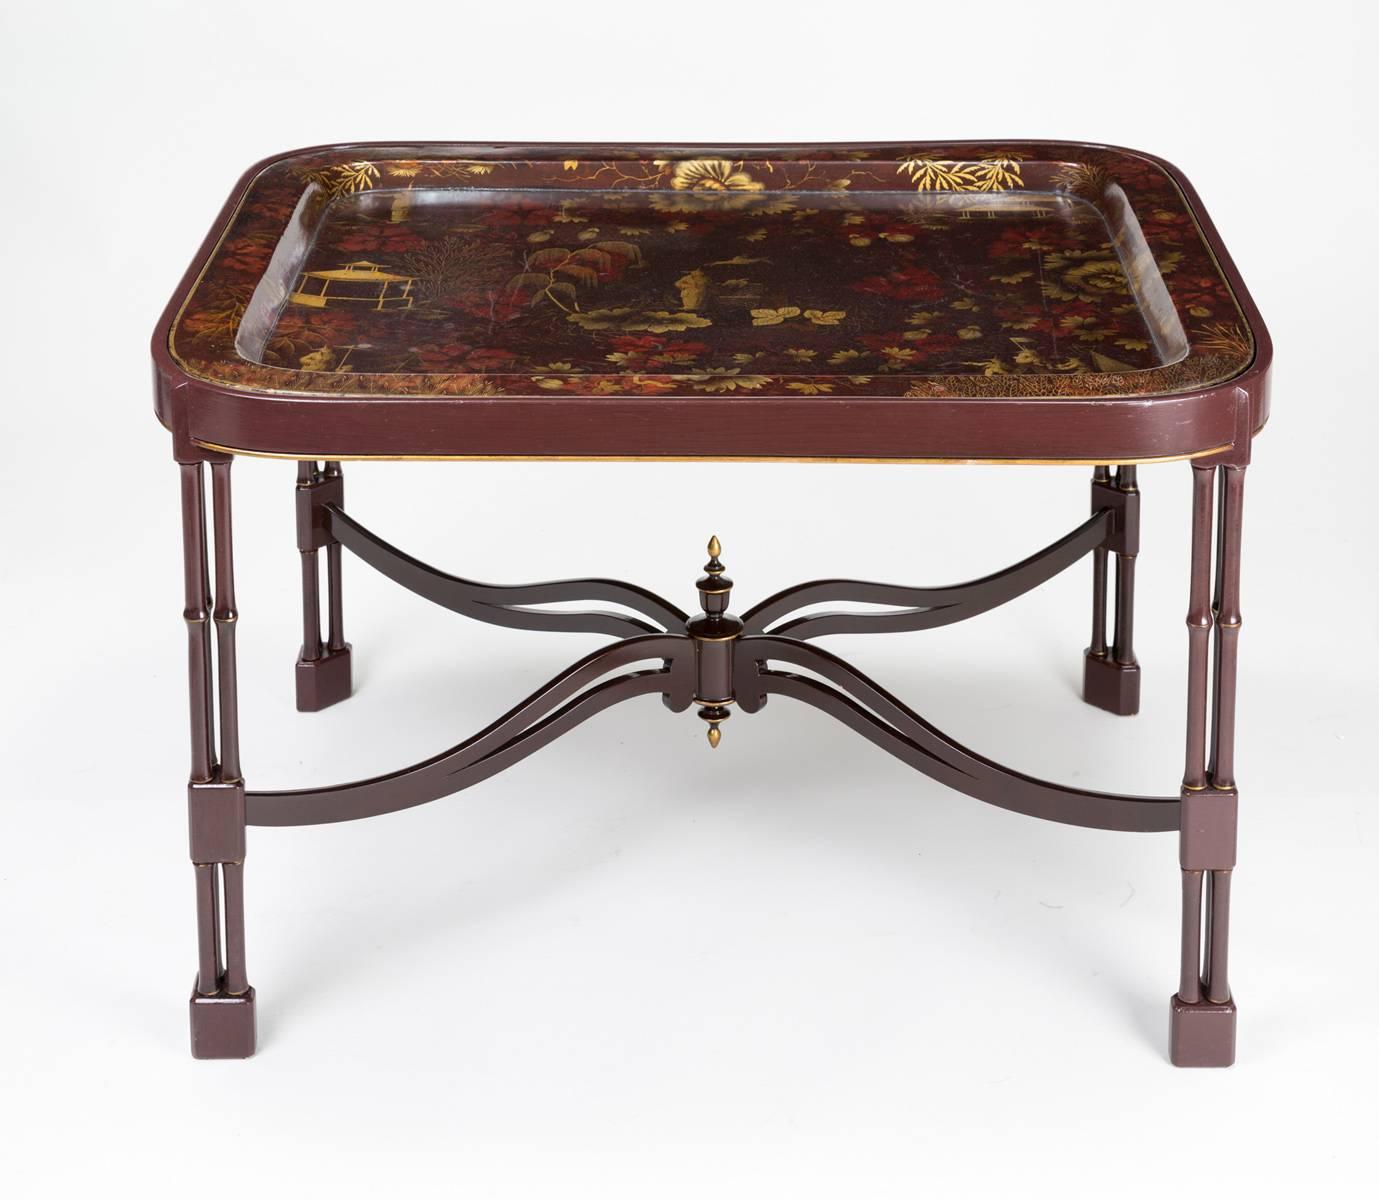 Antique Victorian Papier Mâché rectangular shaped lacquered and gilded tray decorated with Chinese figures, pagodas and floral stencils on a maroon background set into a custom-made maroon stand in Chinese Chippendale style with cluster faux bamboo